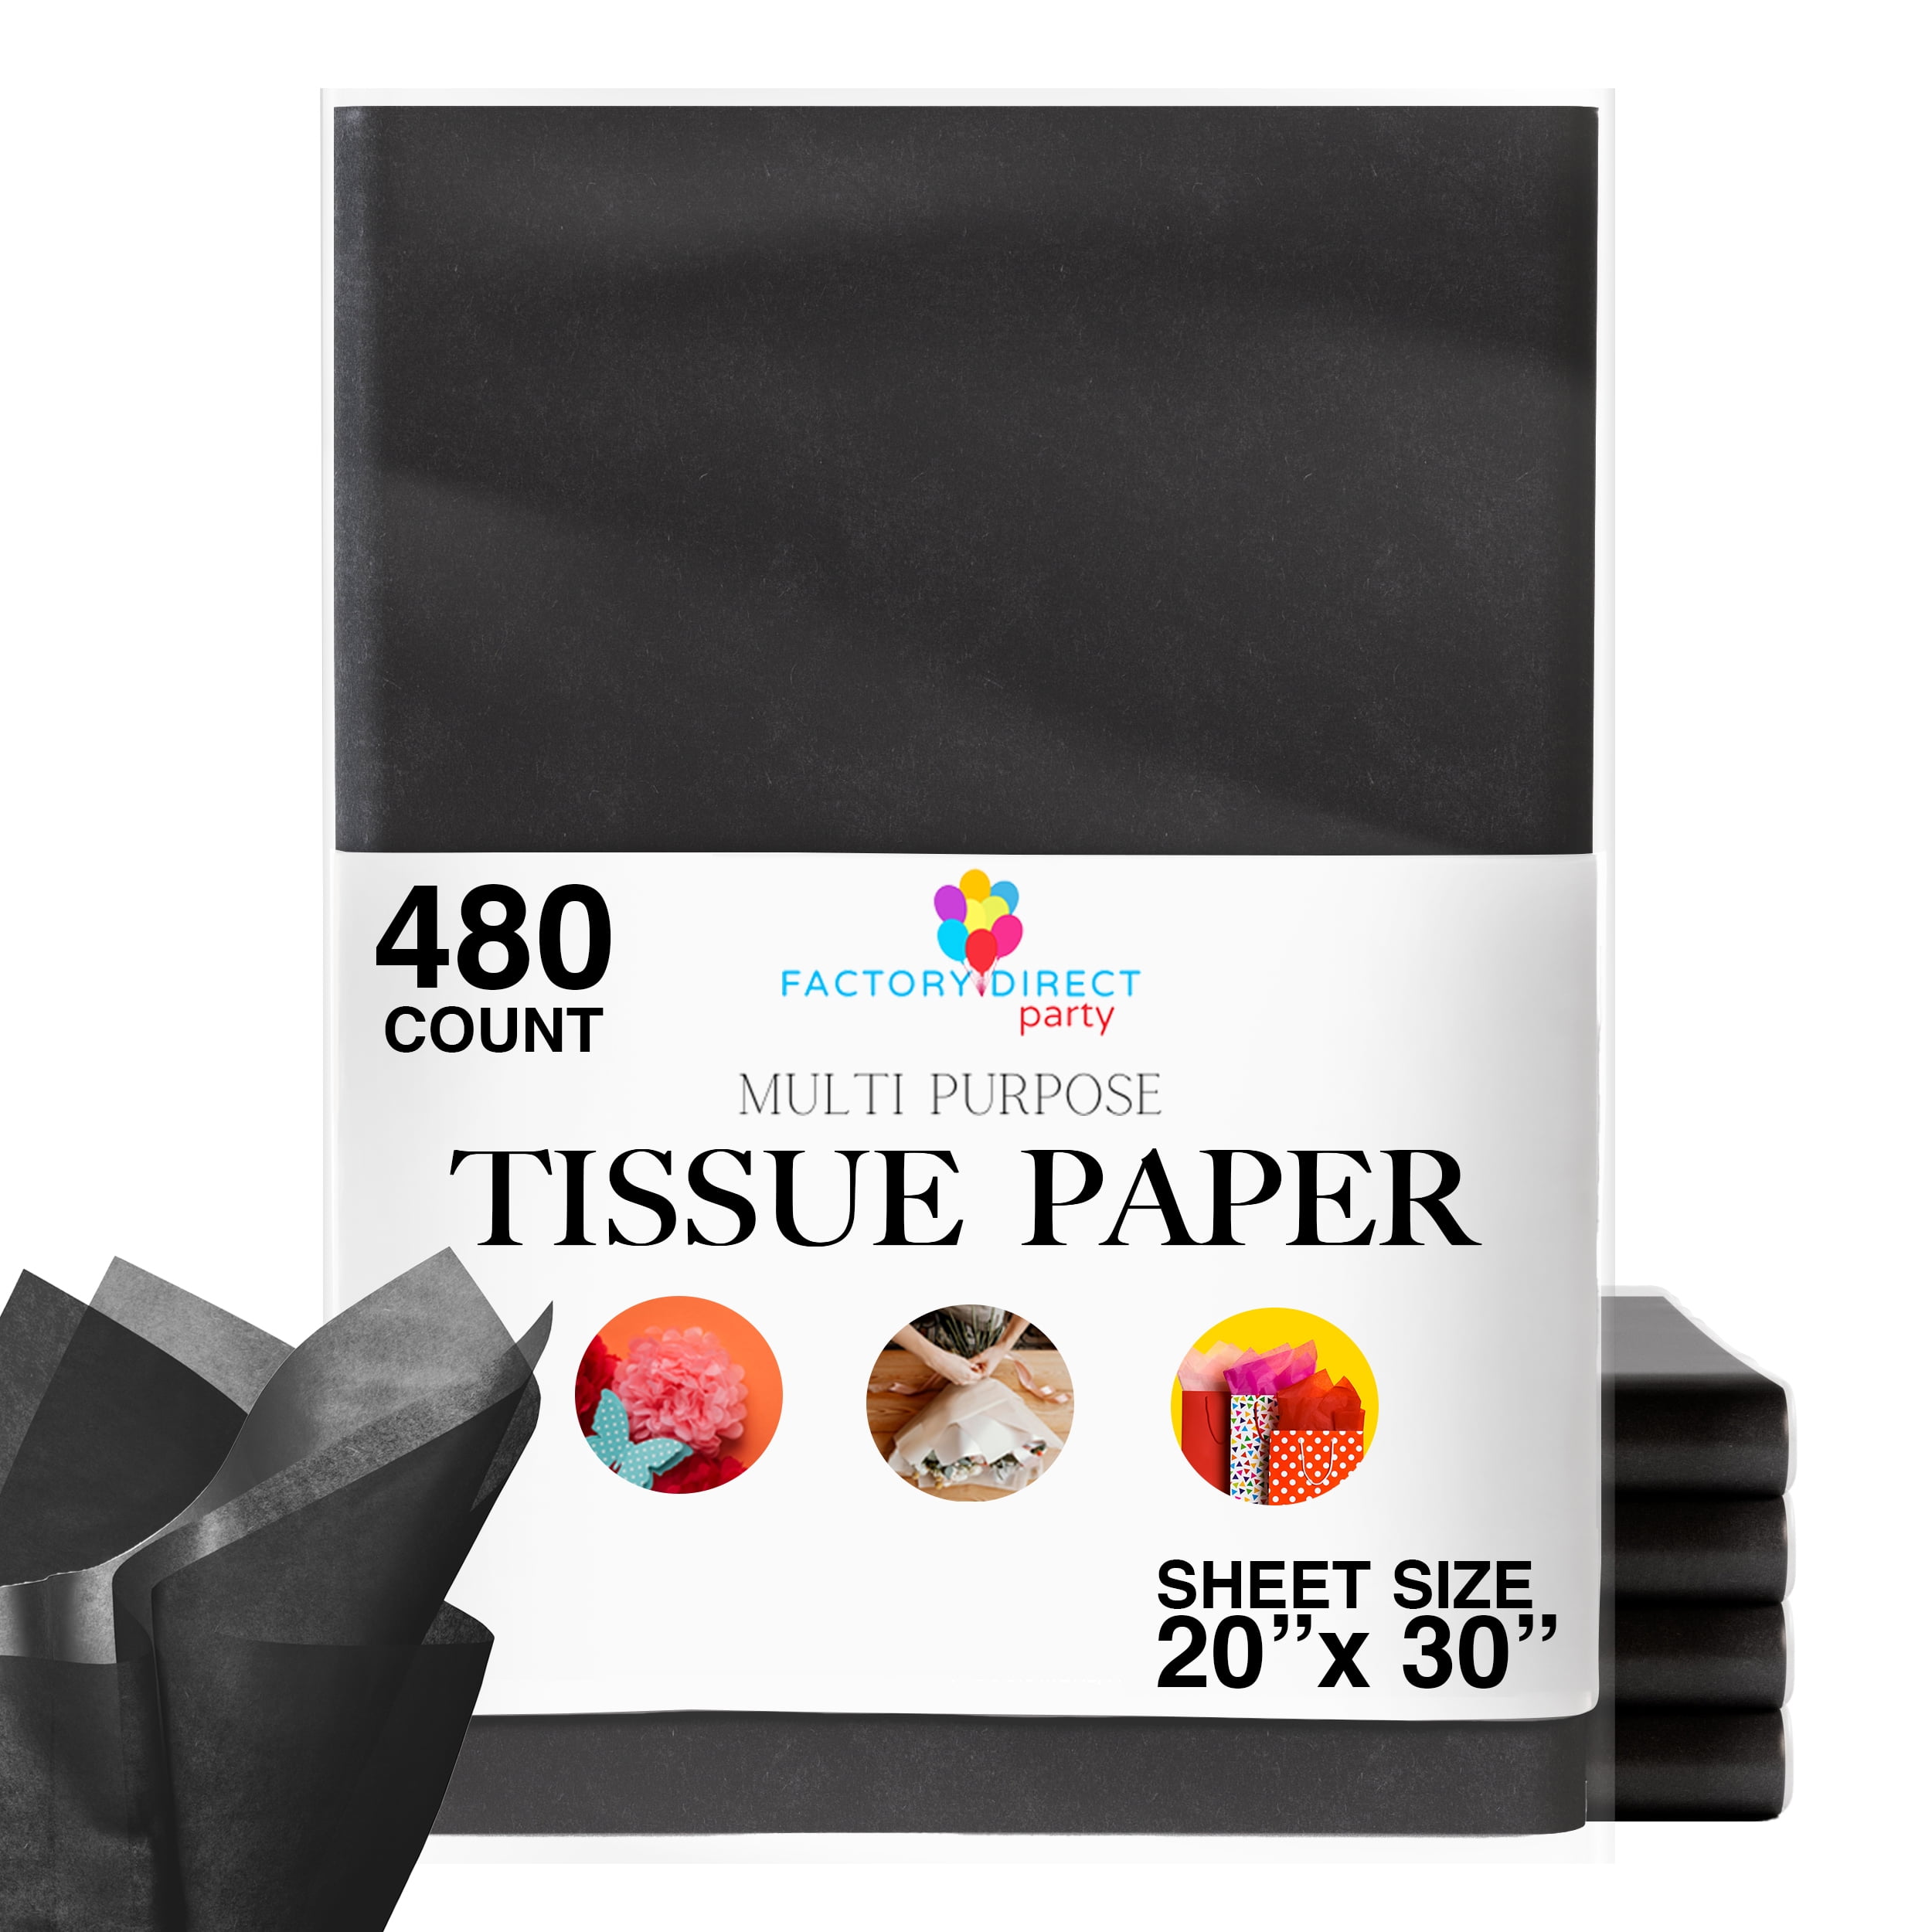 Aloe SatinWrap Solid Color Tissue Paper - 20 x 30 - 480 Sheets per Package